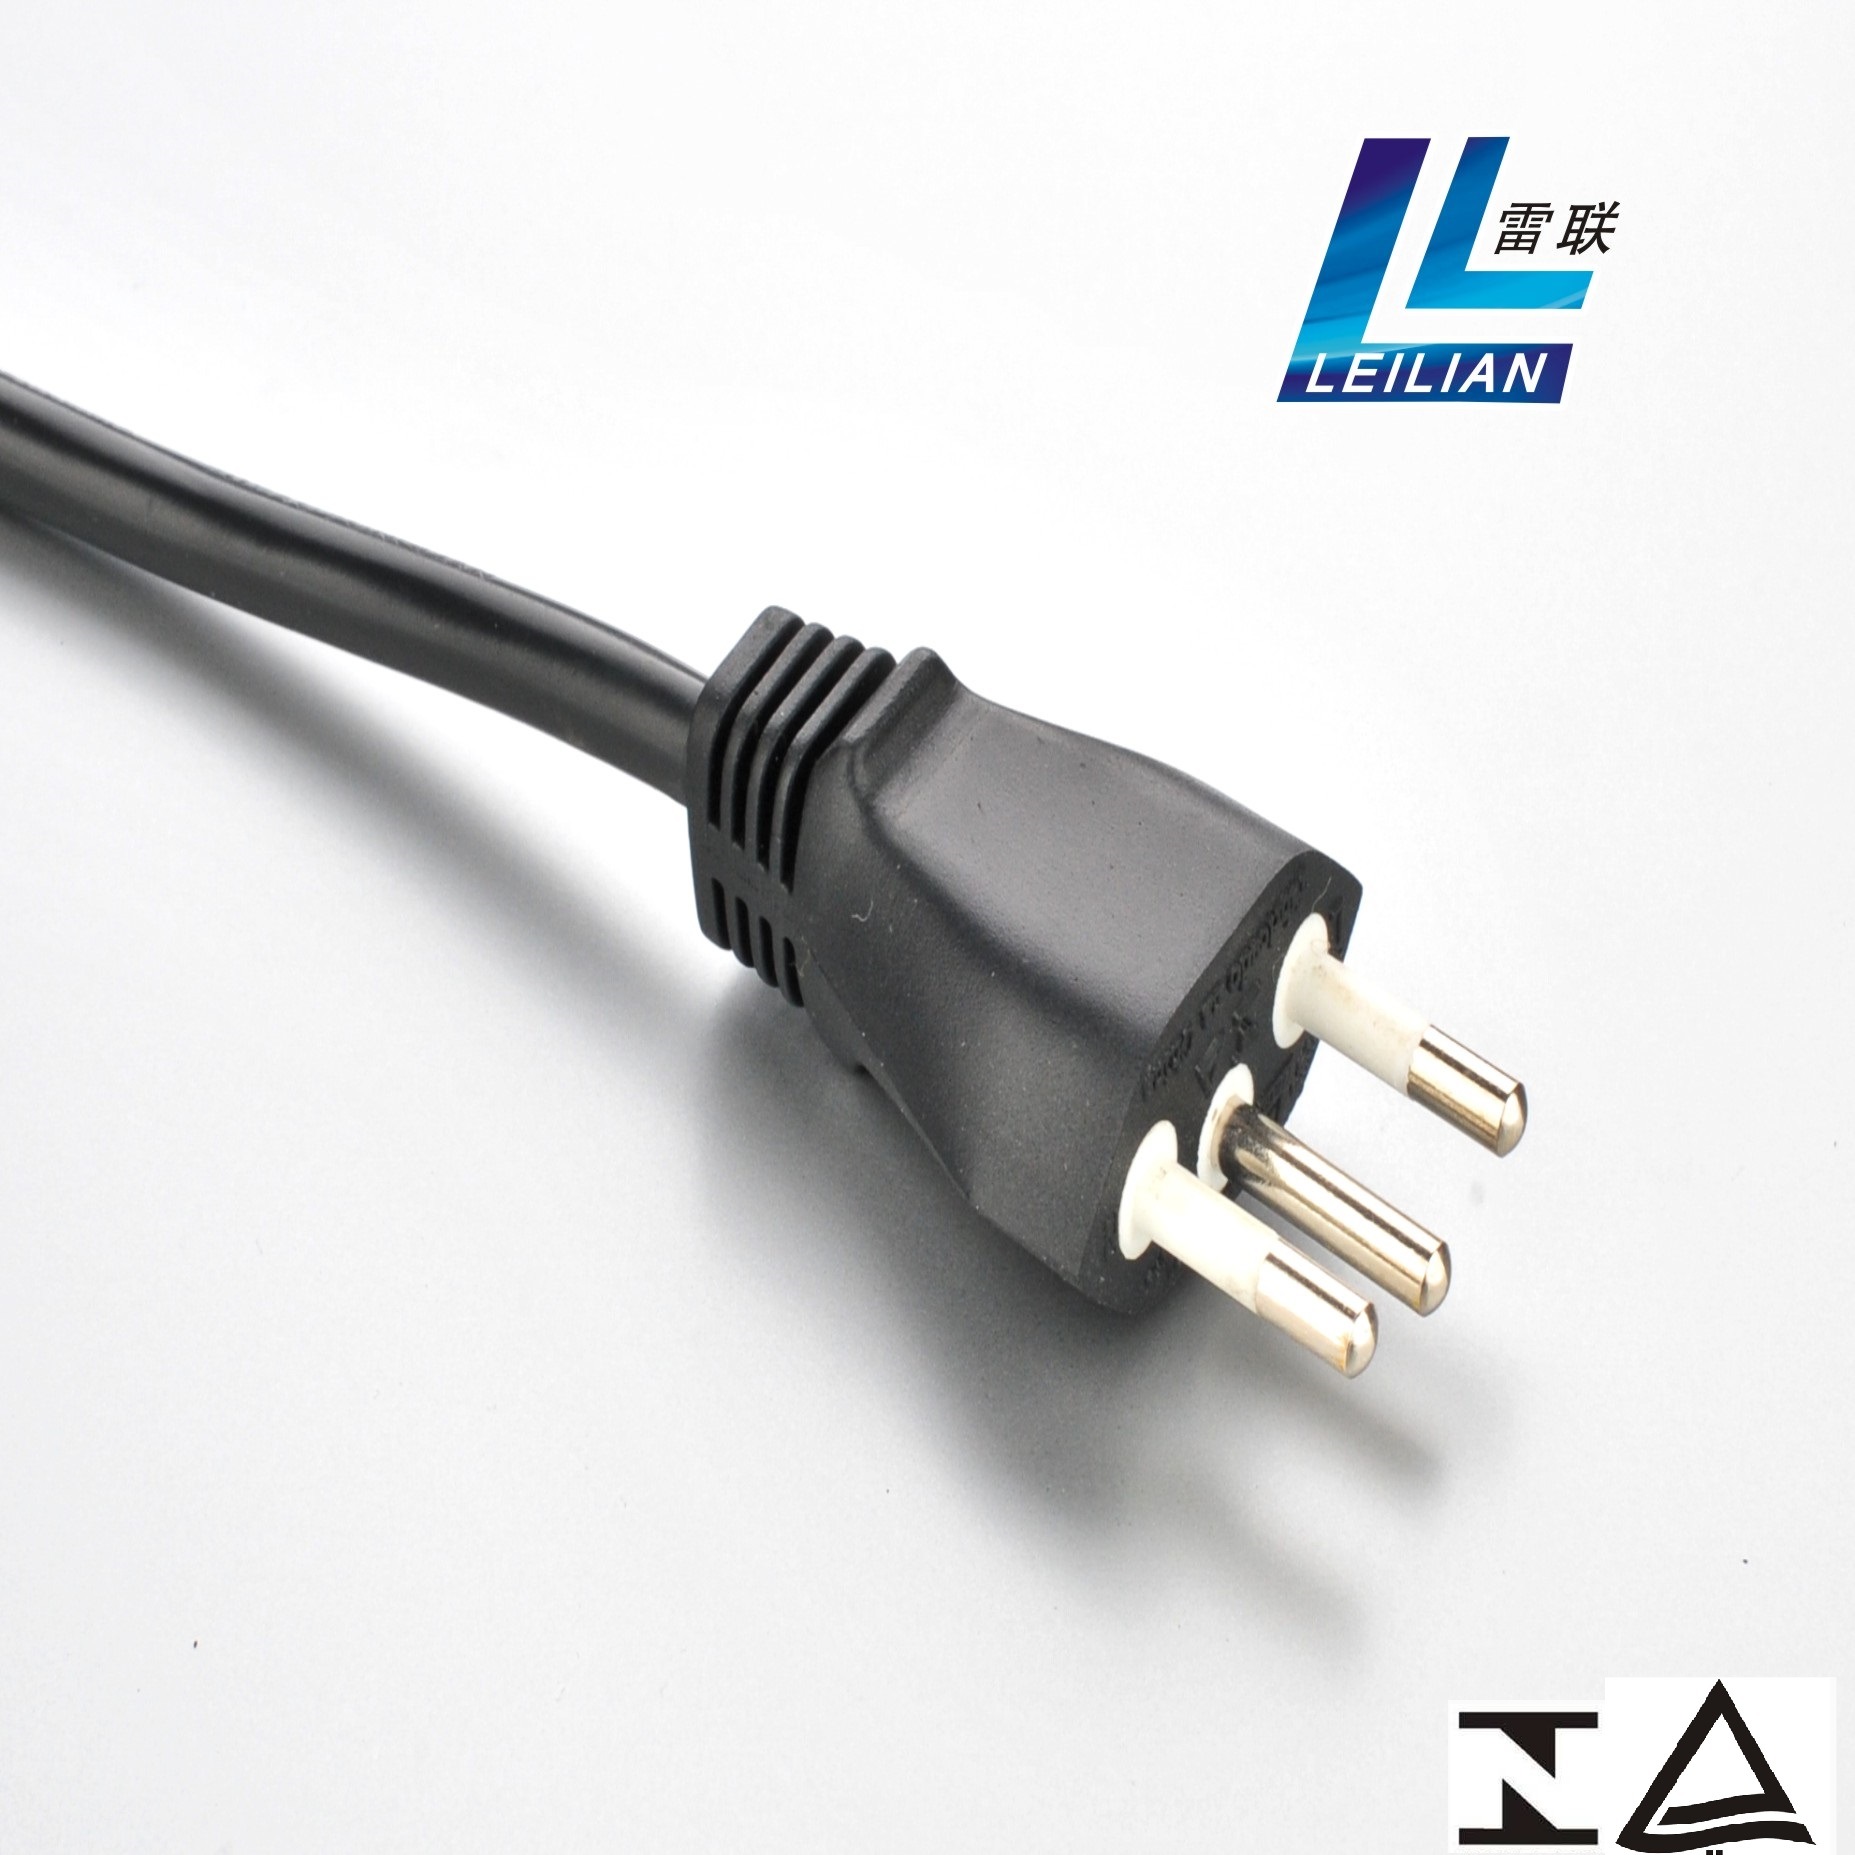 Brazil Standard Power Cord Cable with TUV Certificate Approved